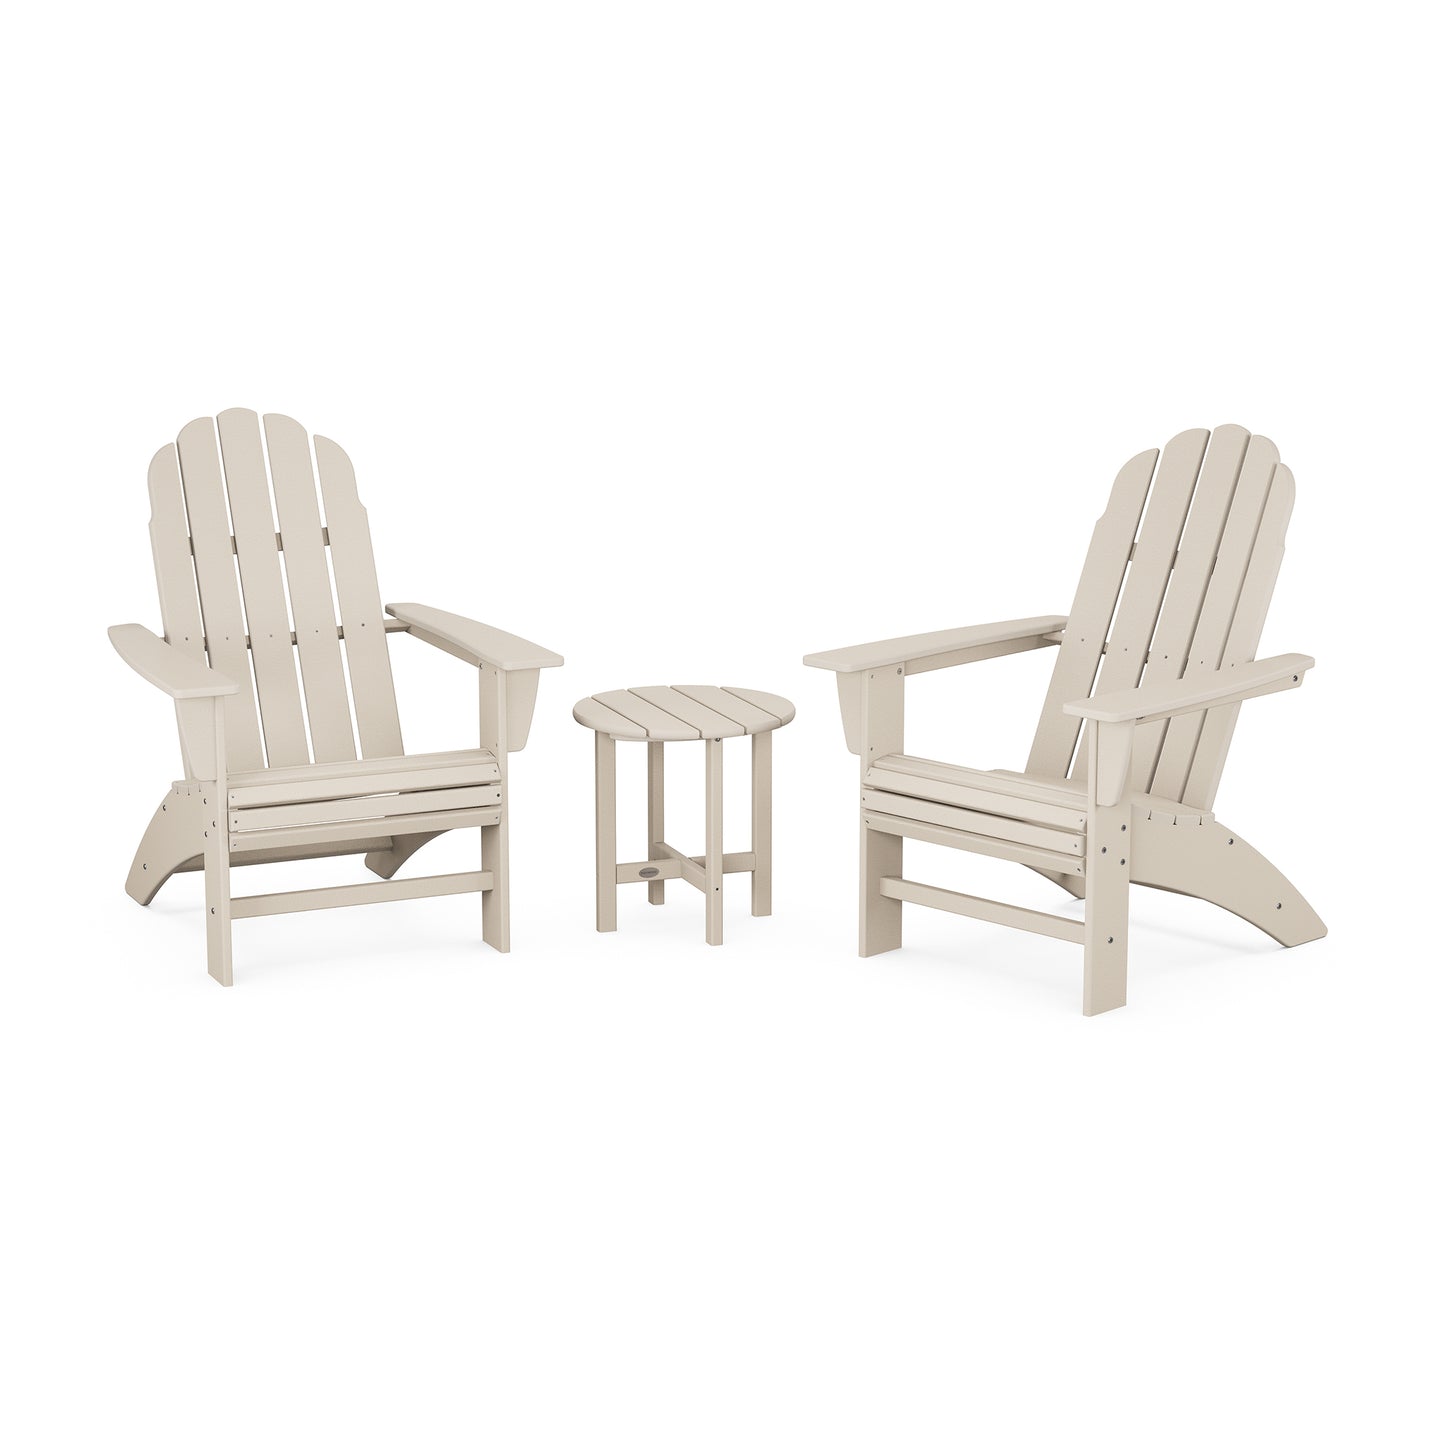 Two beige weather-resistant POLYWOOD Vineyard 3-Piece Curveback Adirondack Sets facing each other with a small round table between them, set on a plain white background.